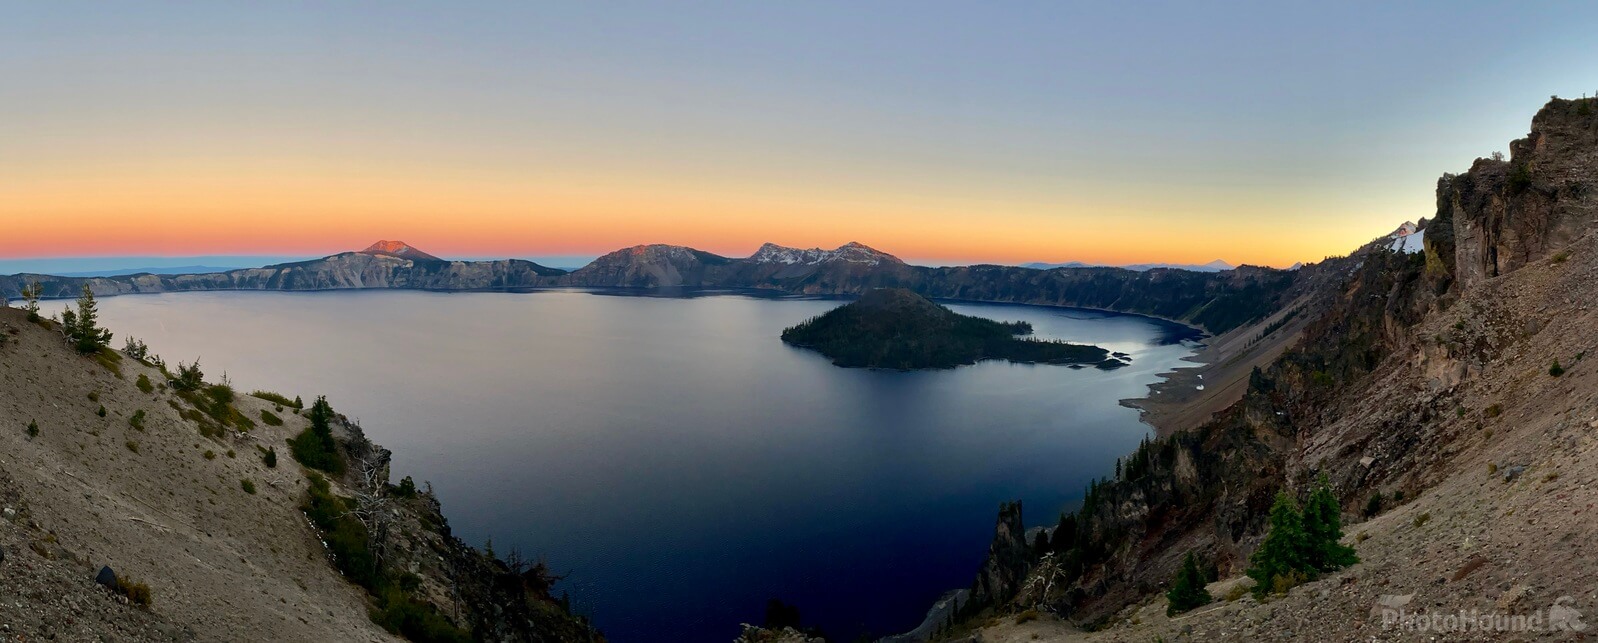 Image of Crater Lake - Merriam Point Overlook by Steve West